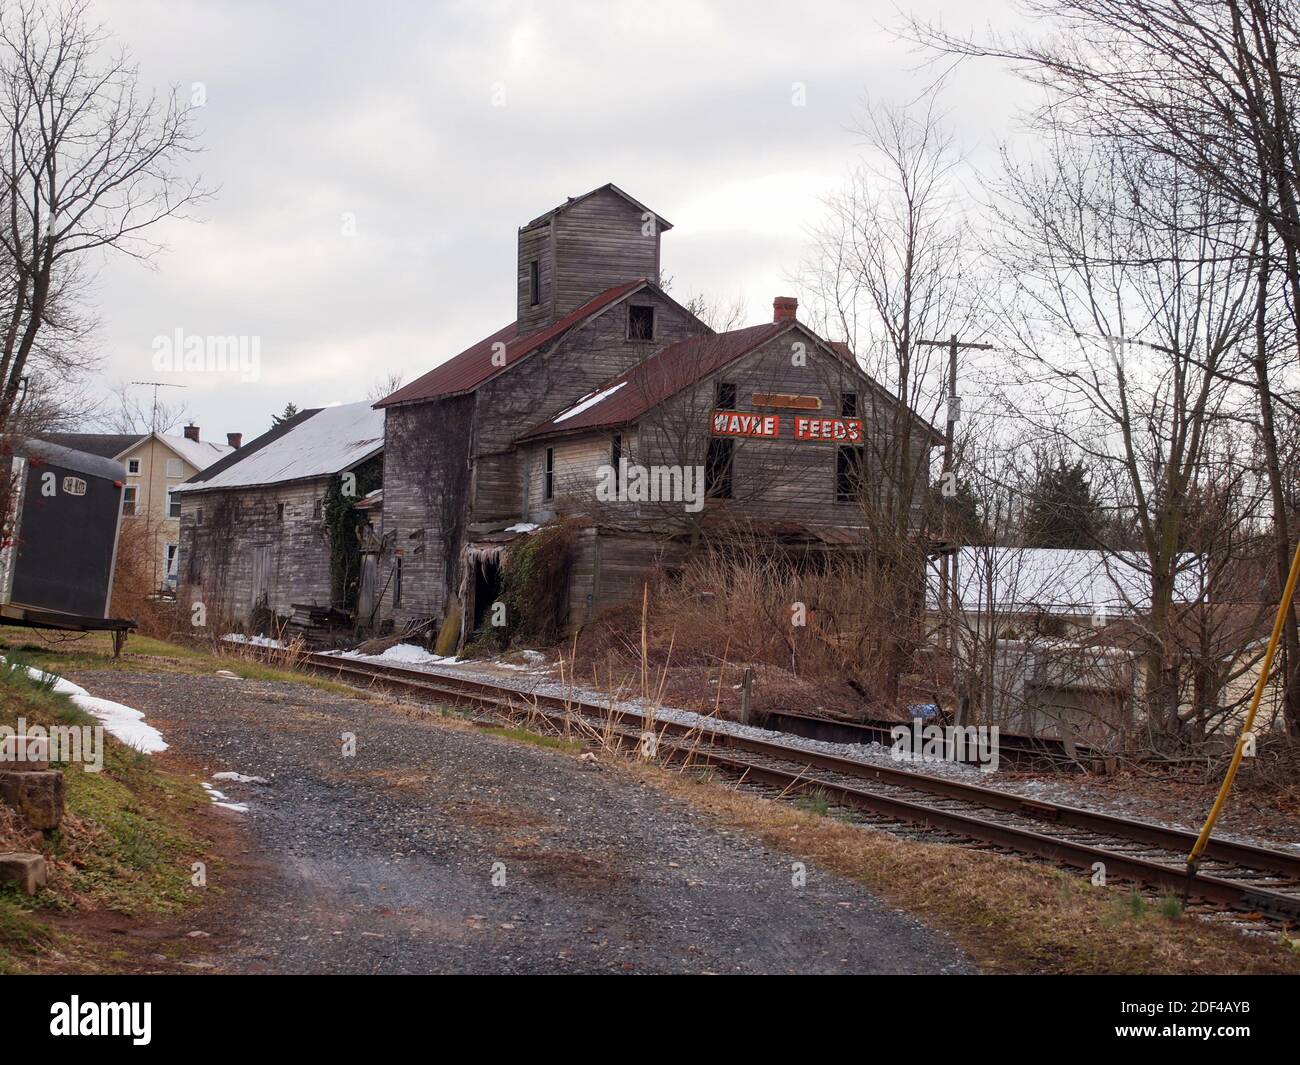 DETOUR, MARYLAND - MARCH 19, 2017: A vintage 1800”s feed mill, the Detour Feed Mill, long out of operation, sits abandoned next to the train tracks in Stock Photo